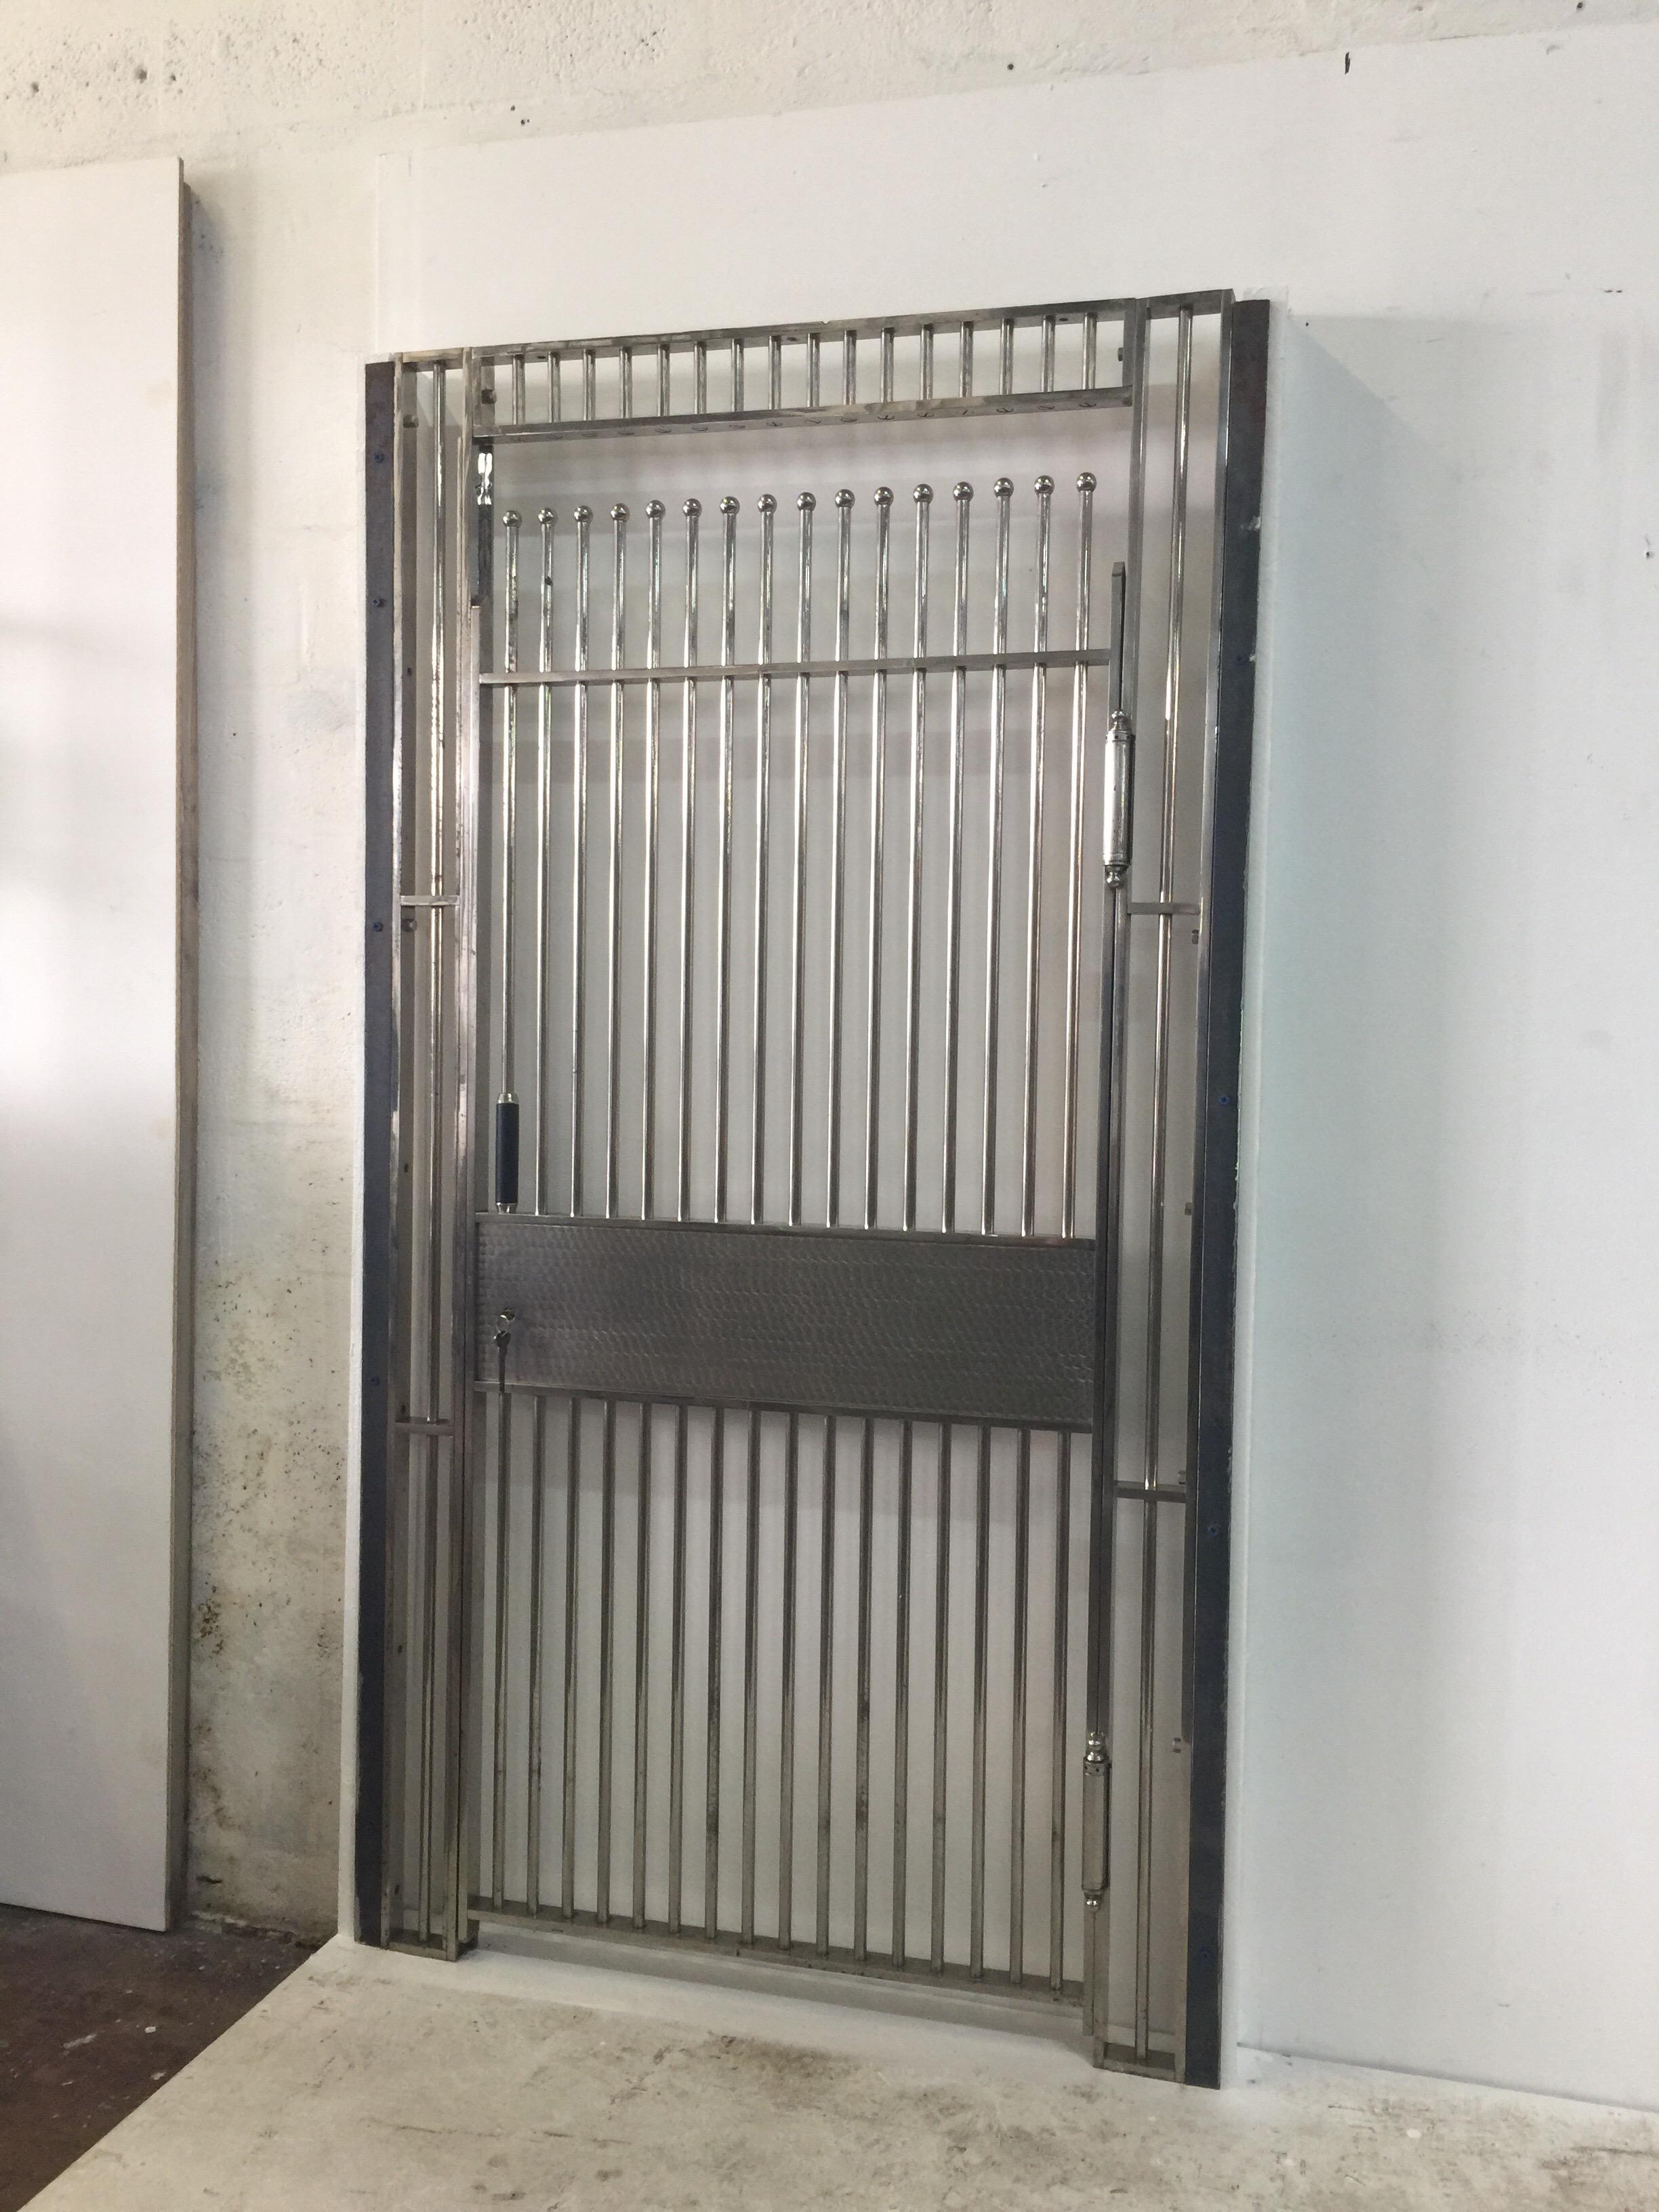 Sourced from a Manhattan bank, this extremely heavy and solid steel bank vault door/gate can be easily installed. It’s original frame for mounting and original keys included. Perfect for use in a Wine Cellar, panic room, etc.

Note: Dimensions of